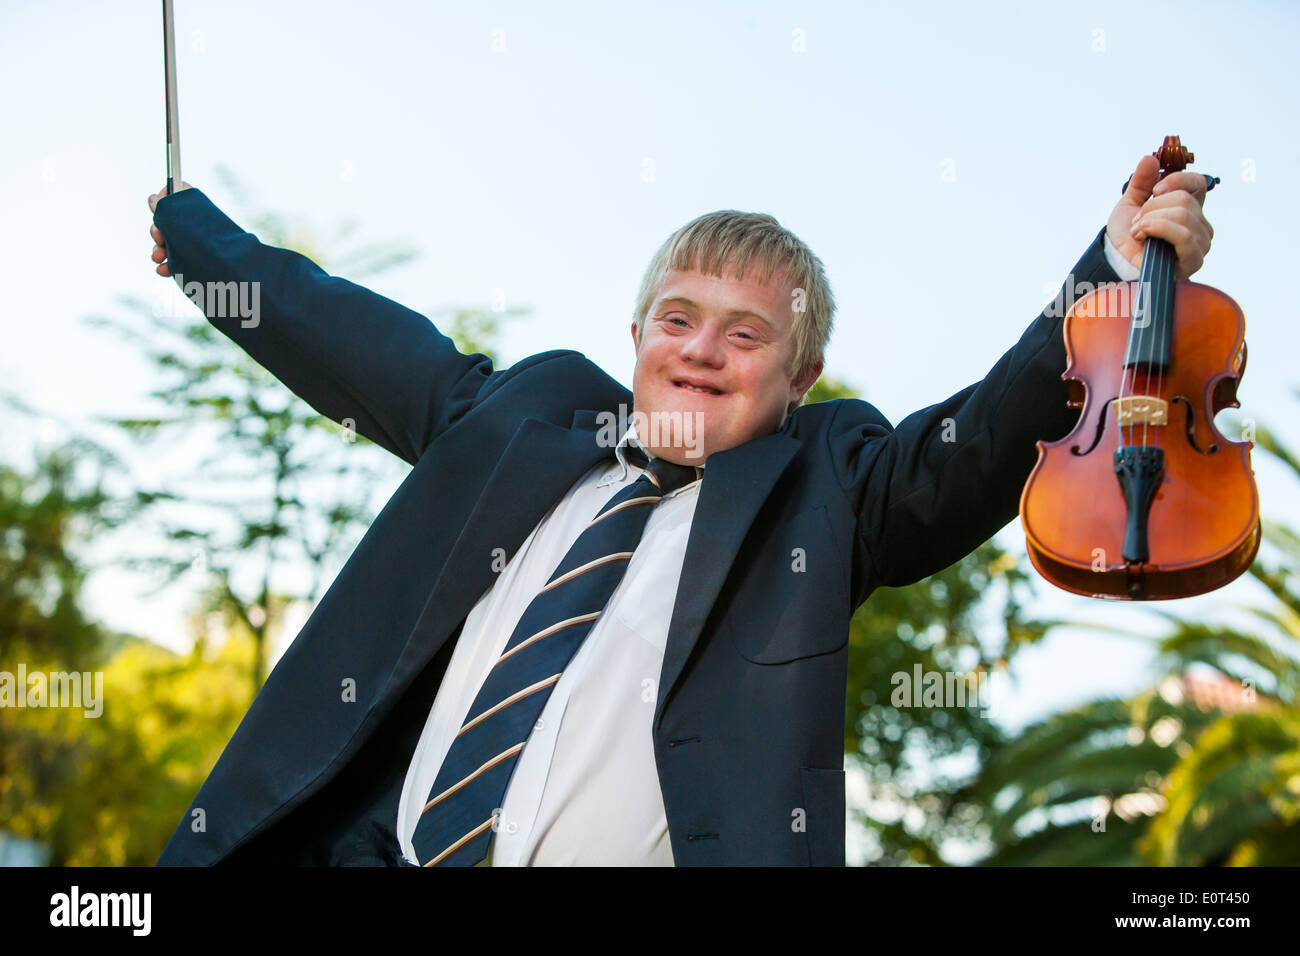 Happy handicapped violinist raising arms outdoors. Stock Photo